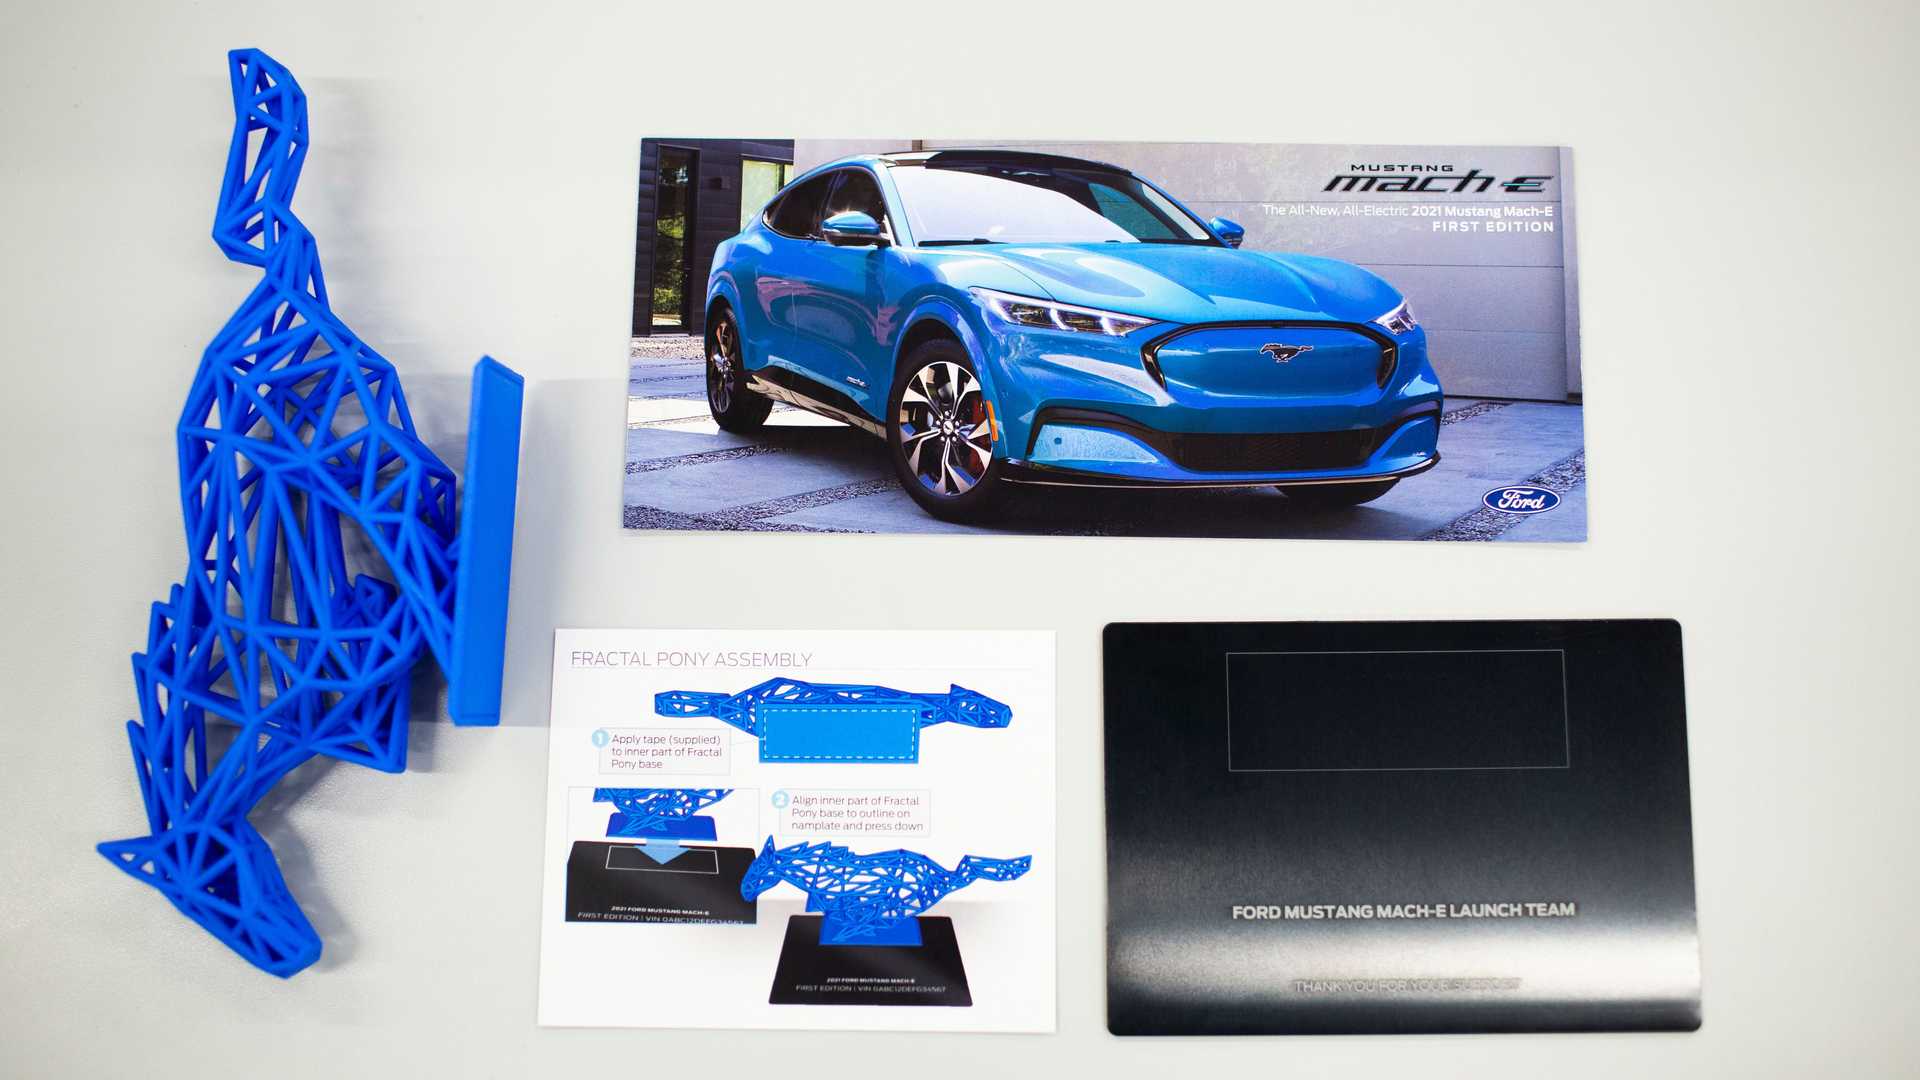 ford-mustang-mach-e-3d-printed-sculpture-with-other-items.jpg